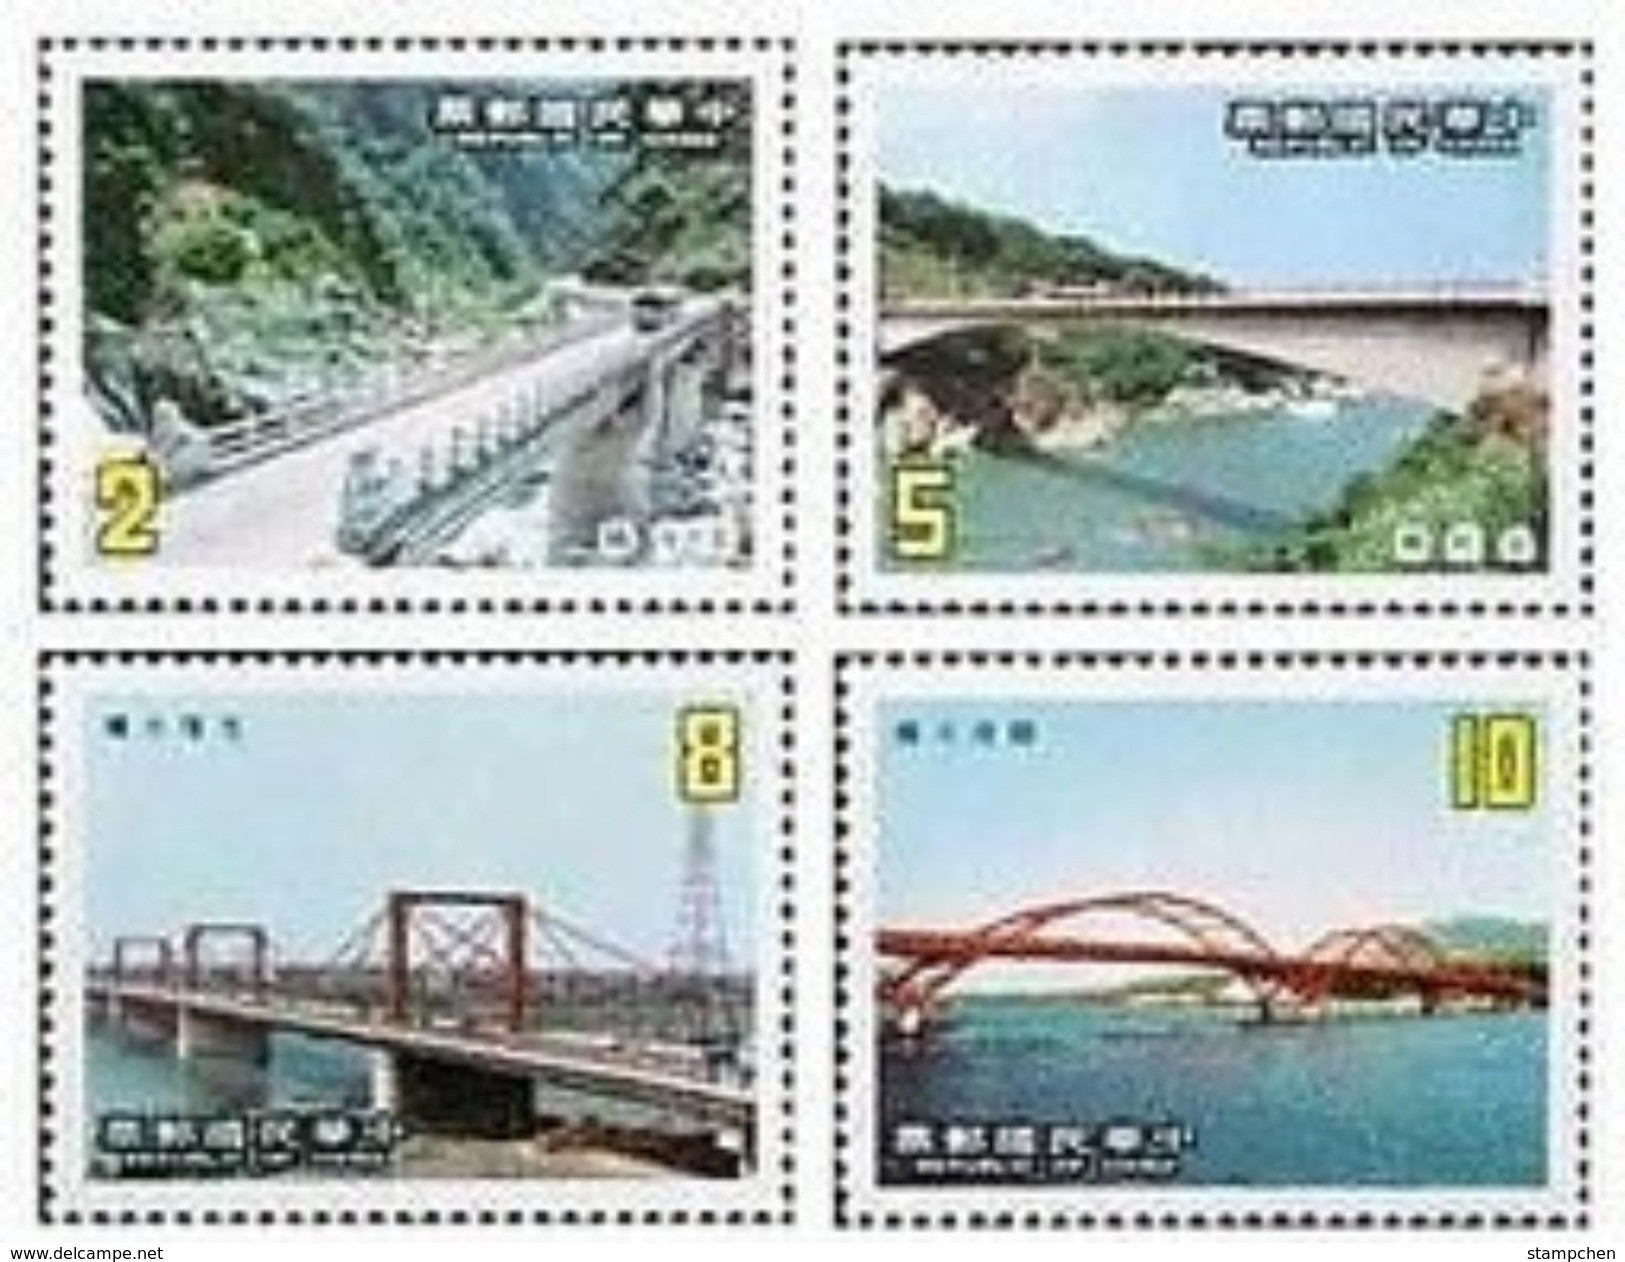 1986 Taiwan Bridge Stamps Boating Rafting Architecture River Scenery Bus - Busses